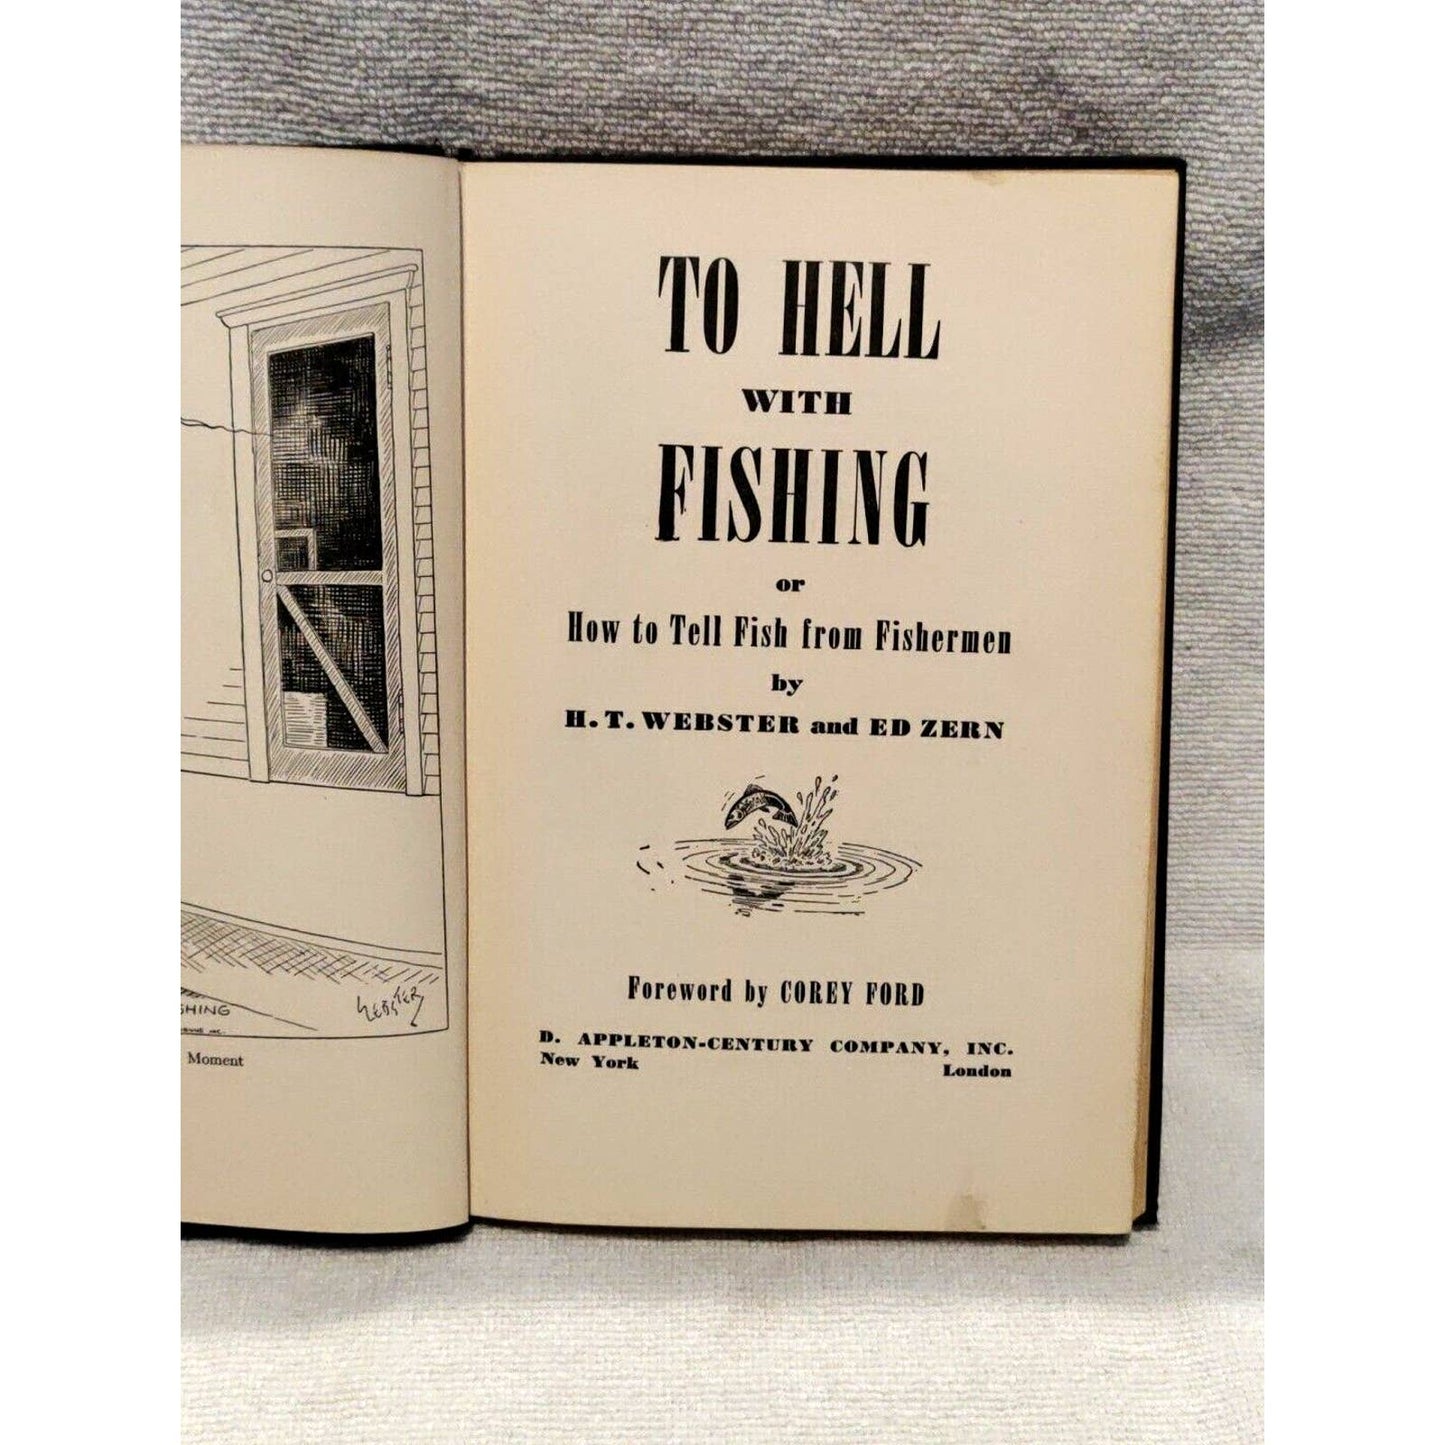 "To Hell With Fishing" book by H.T. Webster Ed Zern Fishing Fishermen Humor